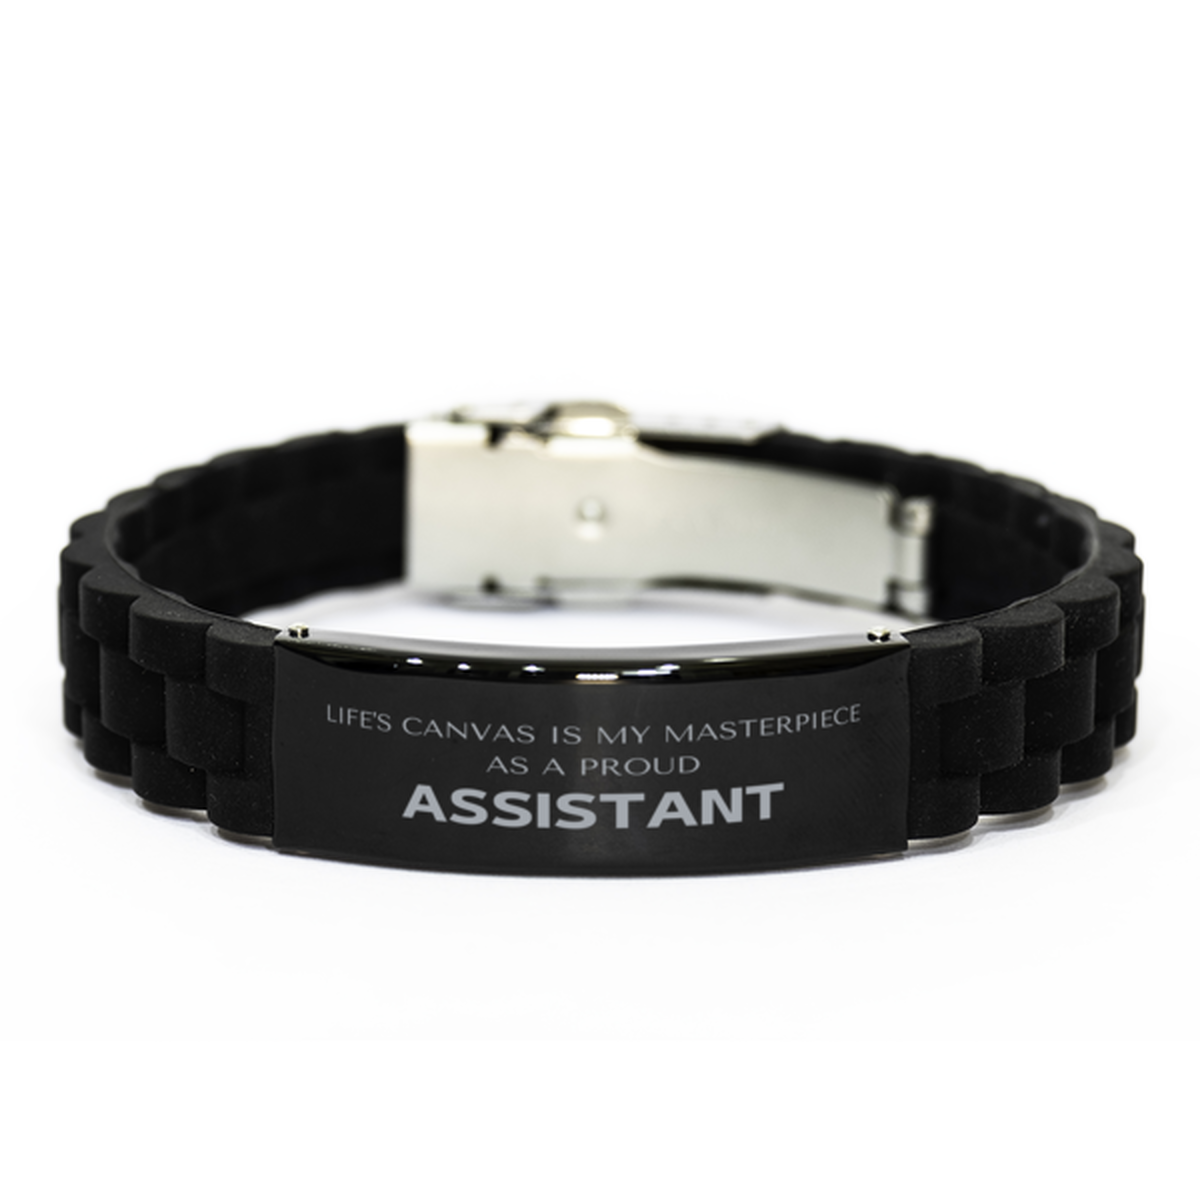 Proud Assistant Gifts, Life's canvas is my masterpiece, Epic Birthday Christmas Unique Black Glidelock Clasp Bracelet For Assistant, Coworkers, Men, Women, Friends